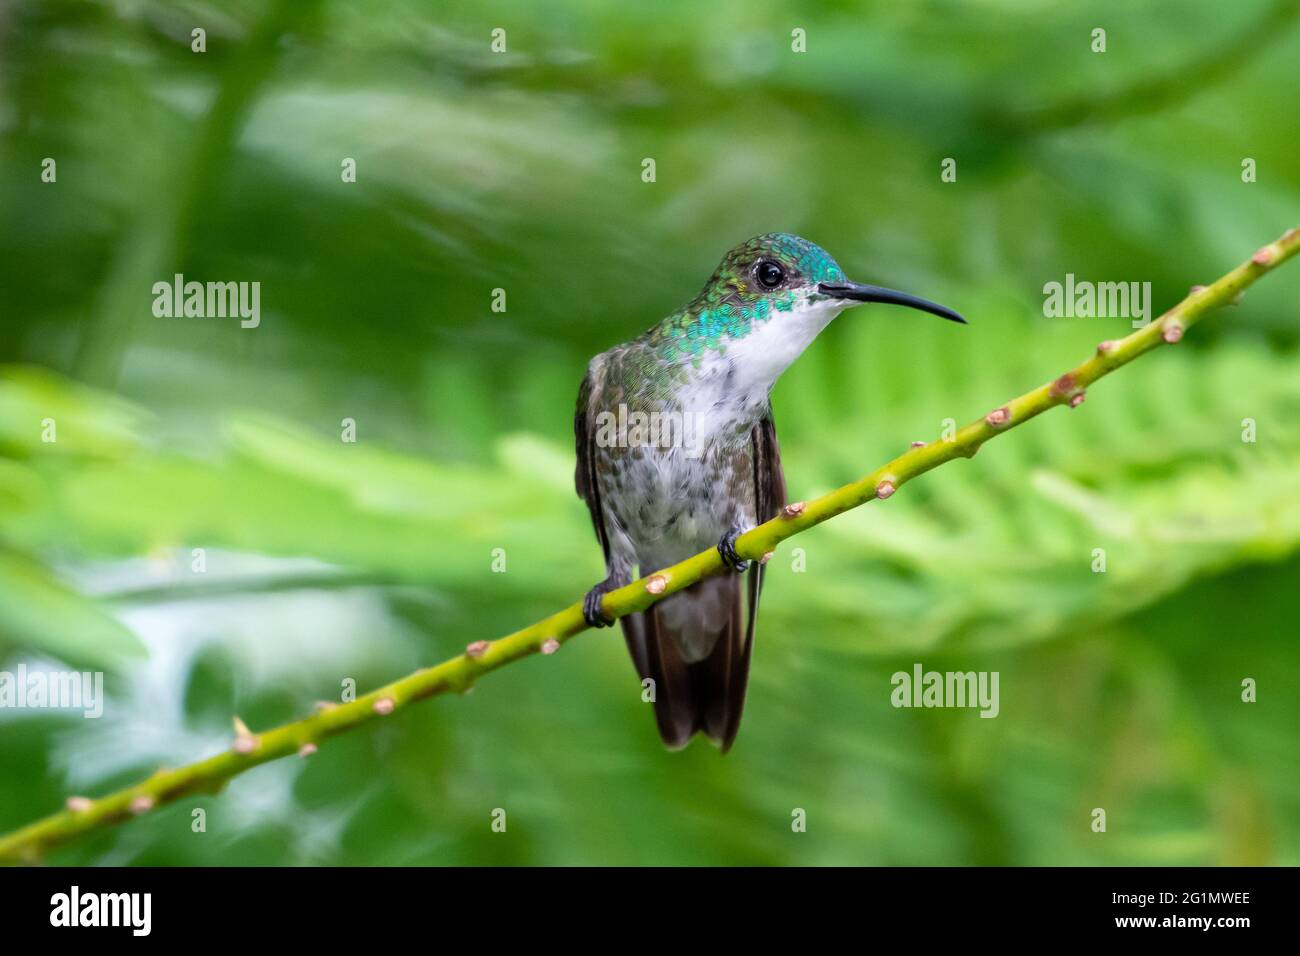 A White-chested Emerald hummingbird (Amazilia brevirostris) perching with leaves blurred in the background. Tropical bird in garden. Small bird. Stock Photo